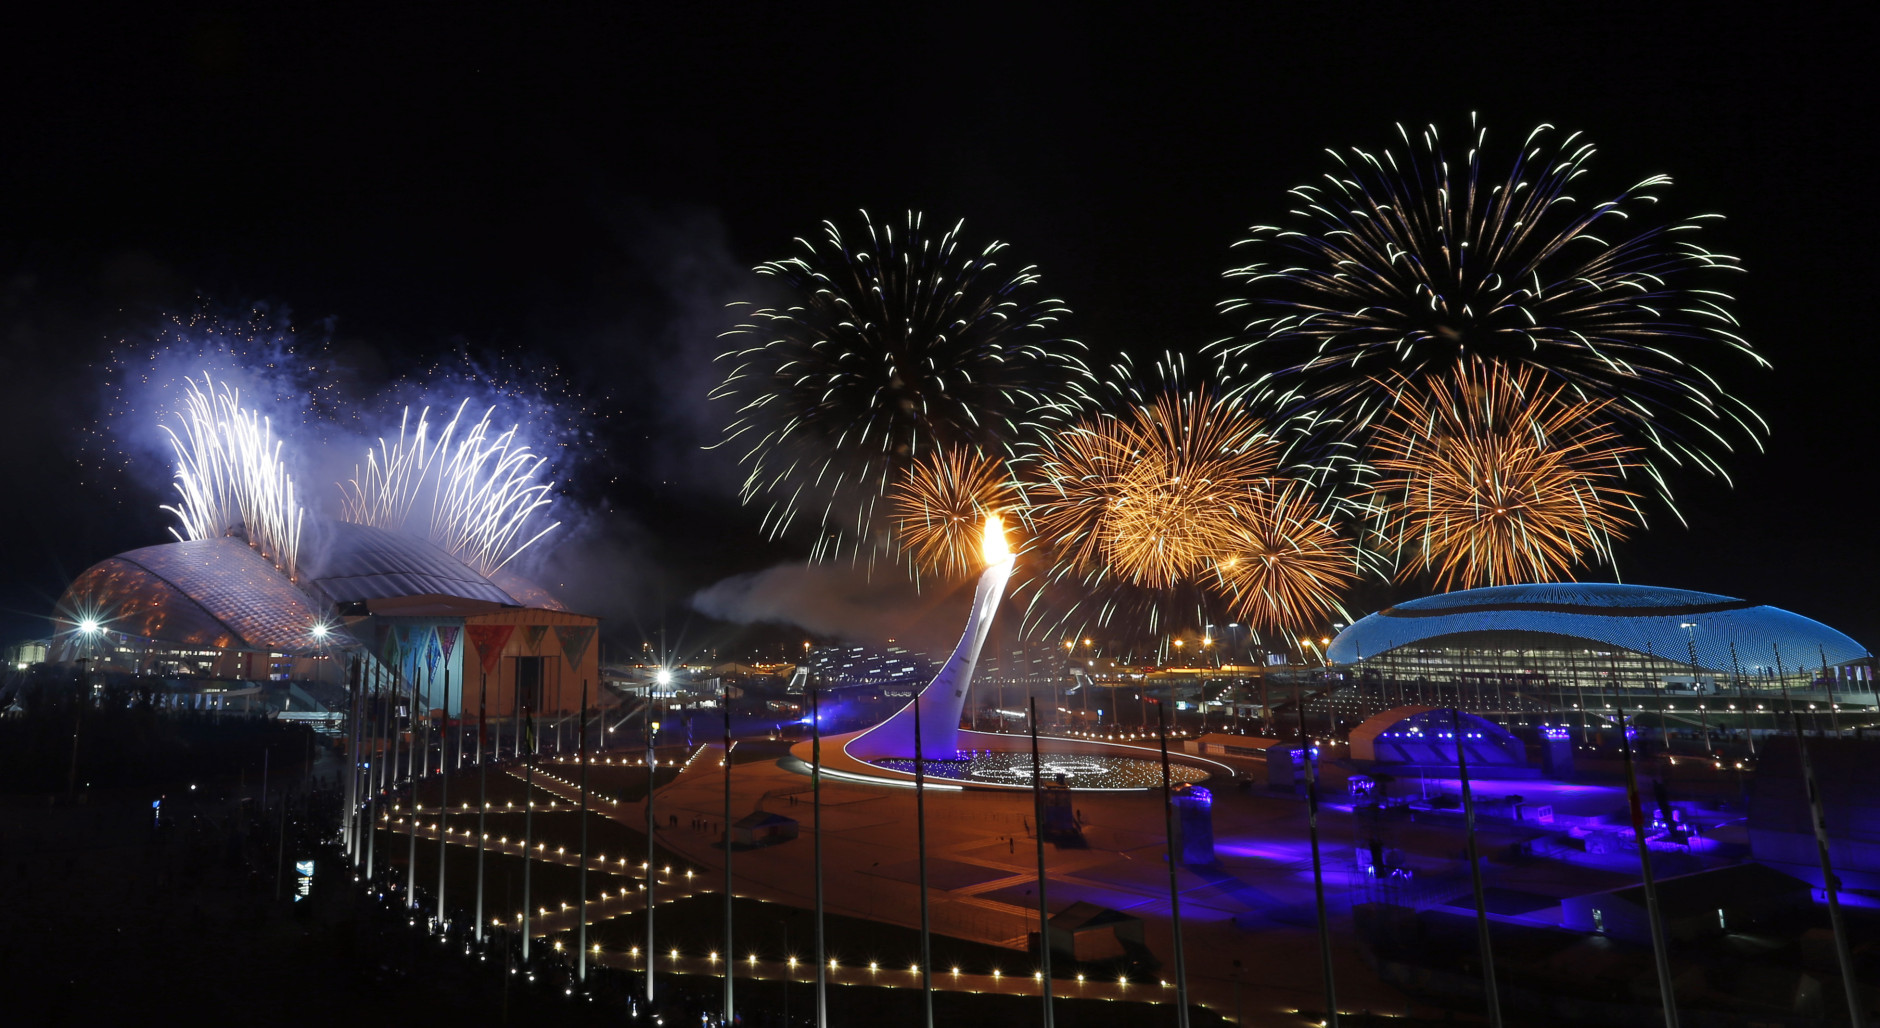 FOR USE AS DESIRED, YEAR END PHOTOS - FILE - Fireworks are seen over the Olympic Park during the opening ceremony of the 2014 Winter Olympics in Sochi, Russia, Friday, Feb. 7, 2014. (AP Photo/Julio Cortez, File)